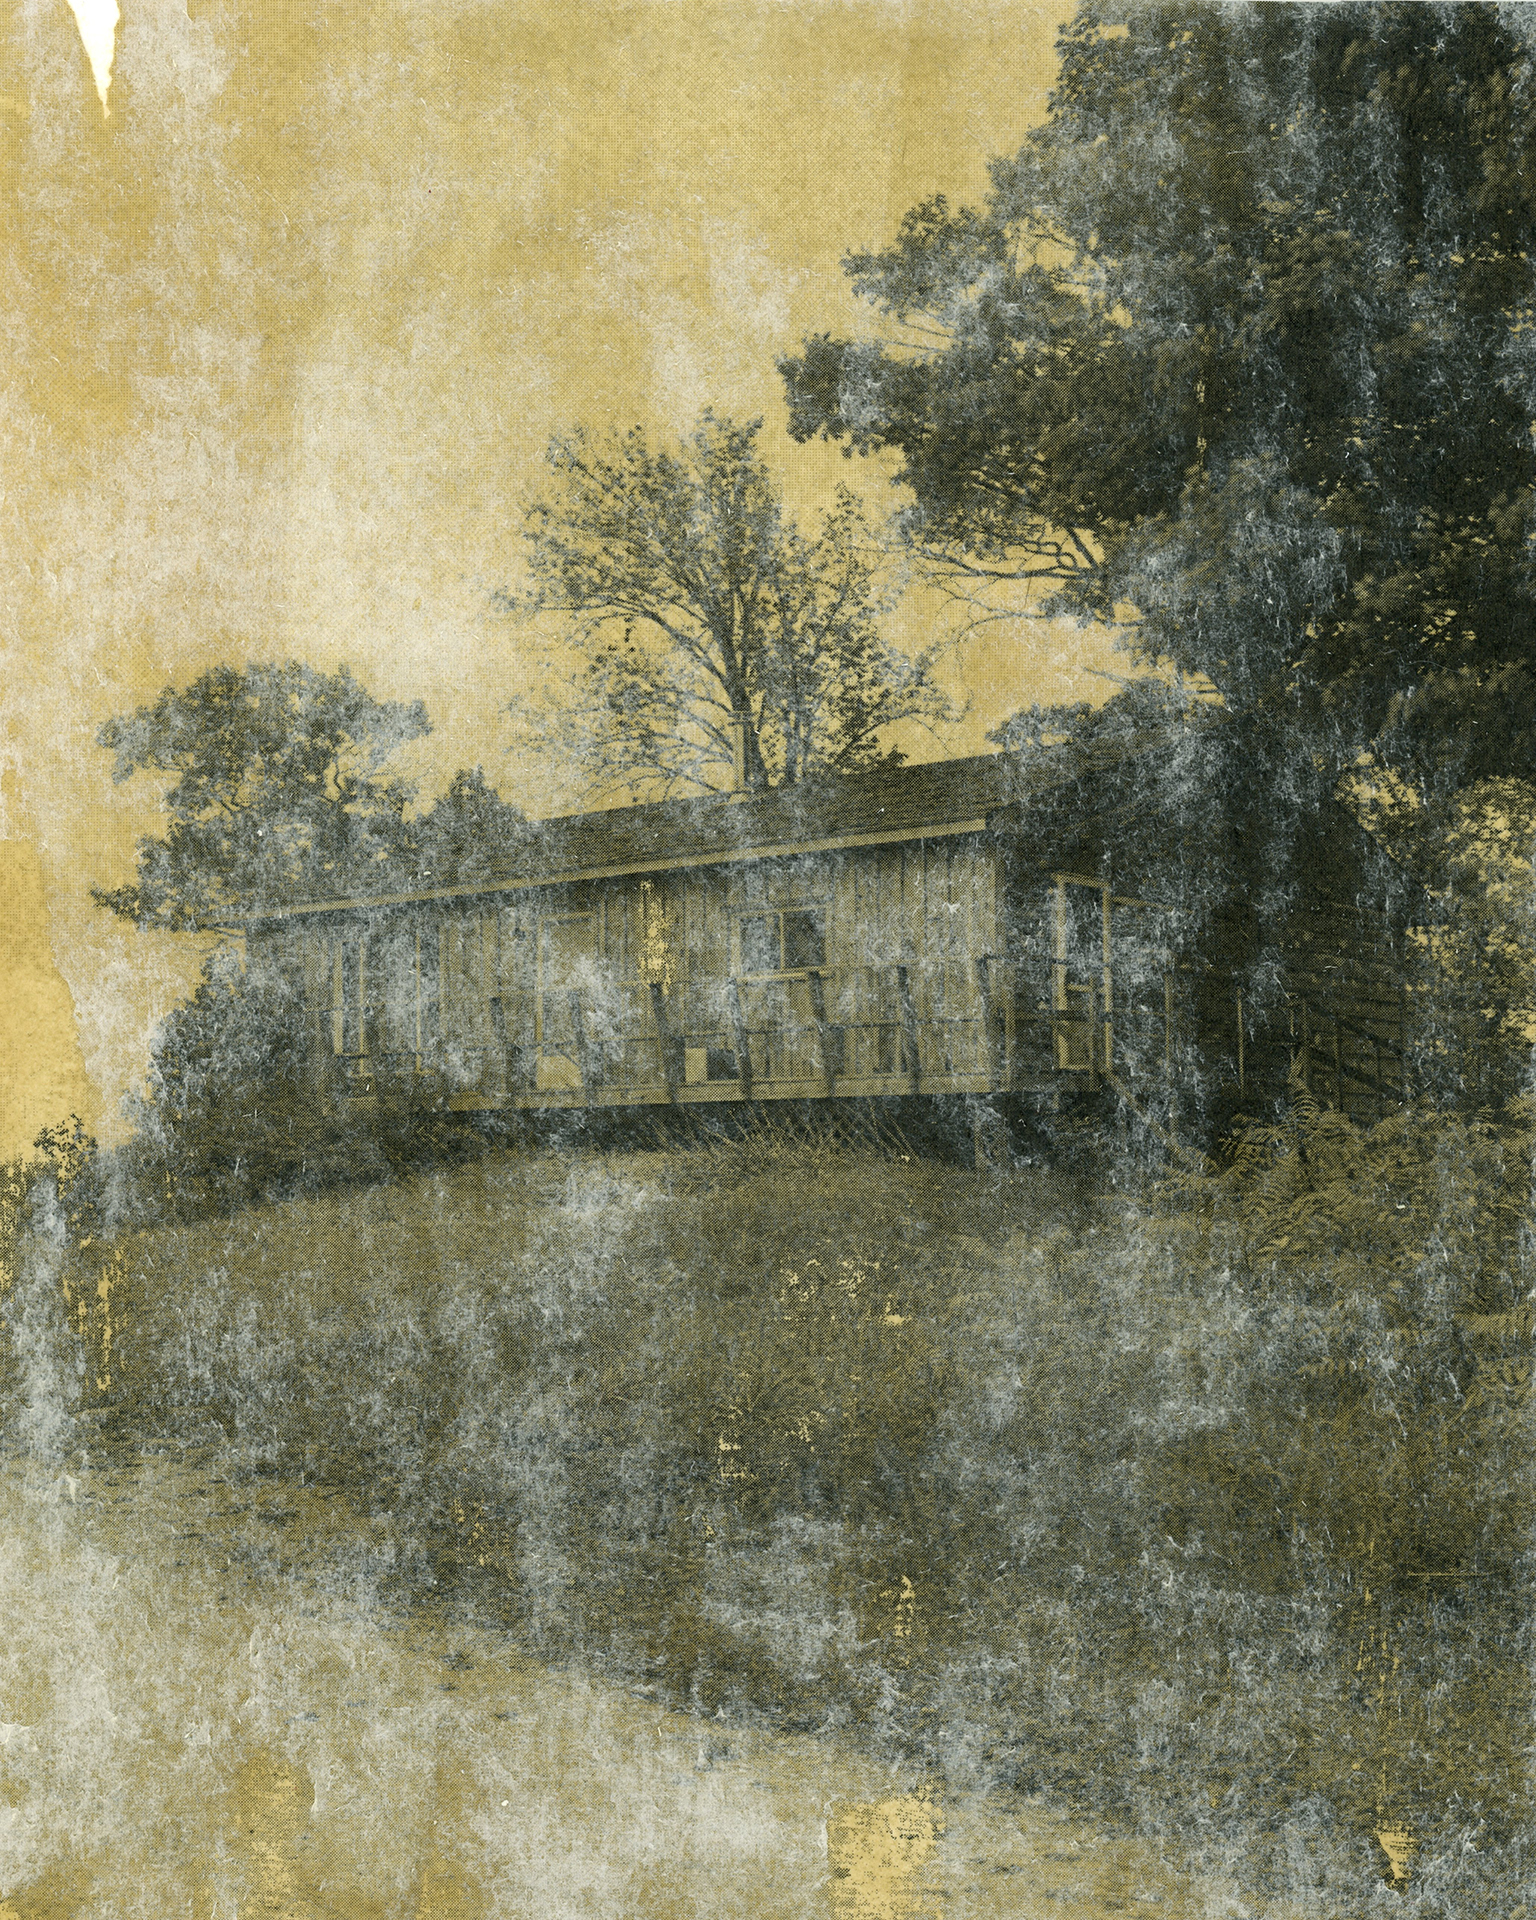 House at The Point: A black and white image of an old wooden house with a wrap around balcony sits on top of a small hill, surrounded by trees on either side. A dirt path is visible in the bottom left corner of the image. The image has been transferred to a piece of watercolour paper dyed with Sage that is green-brown in colour.